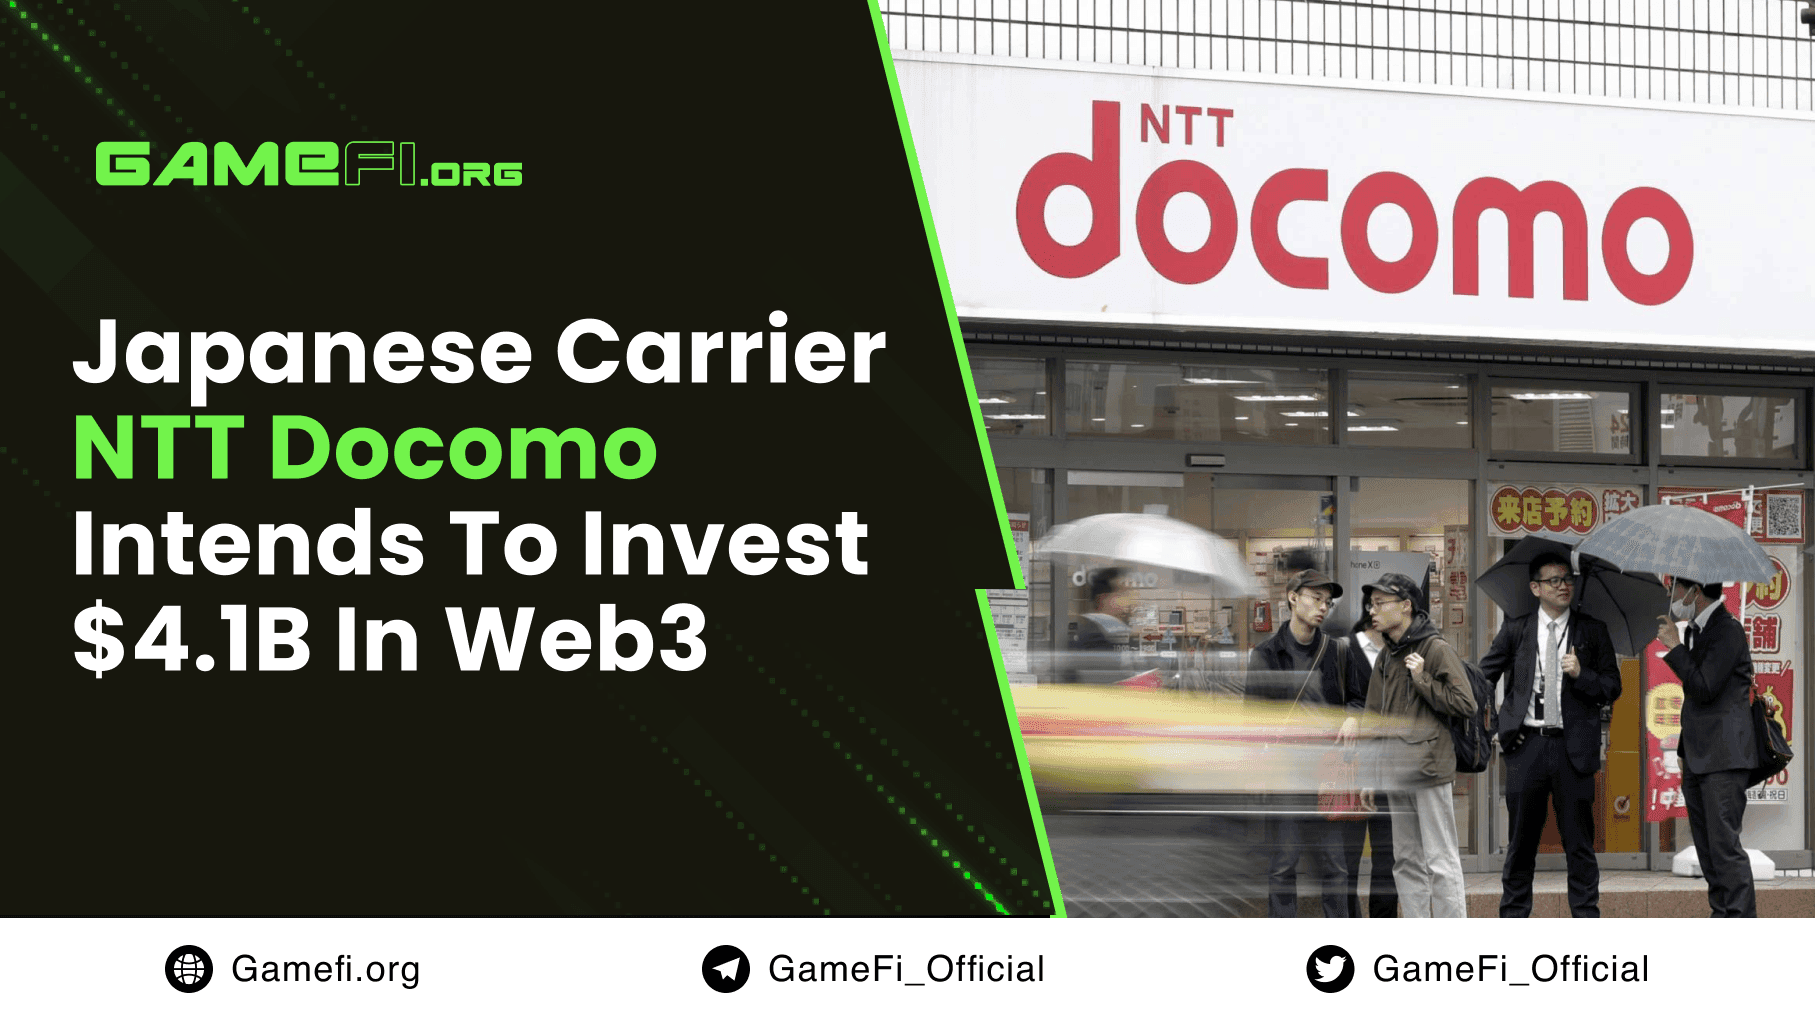 Japanese Carrier NTT Docomo Intends To Invest $4.1B In Web3